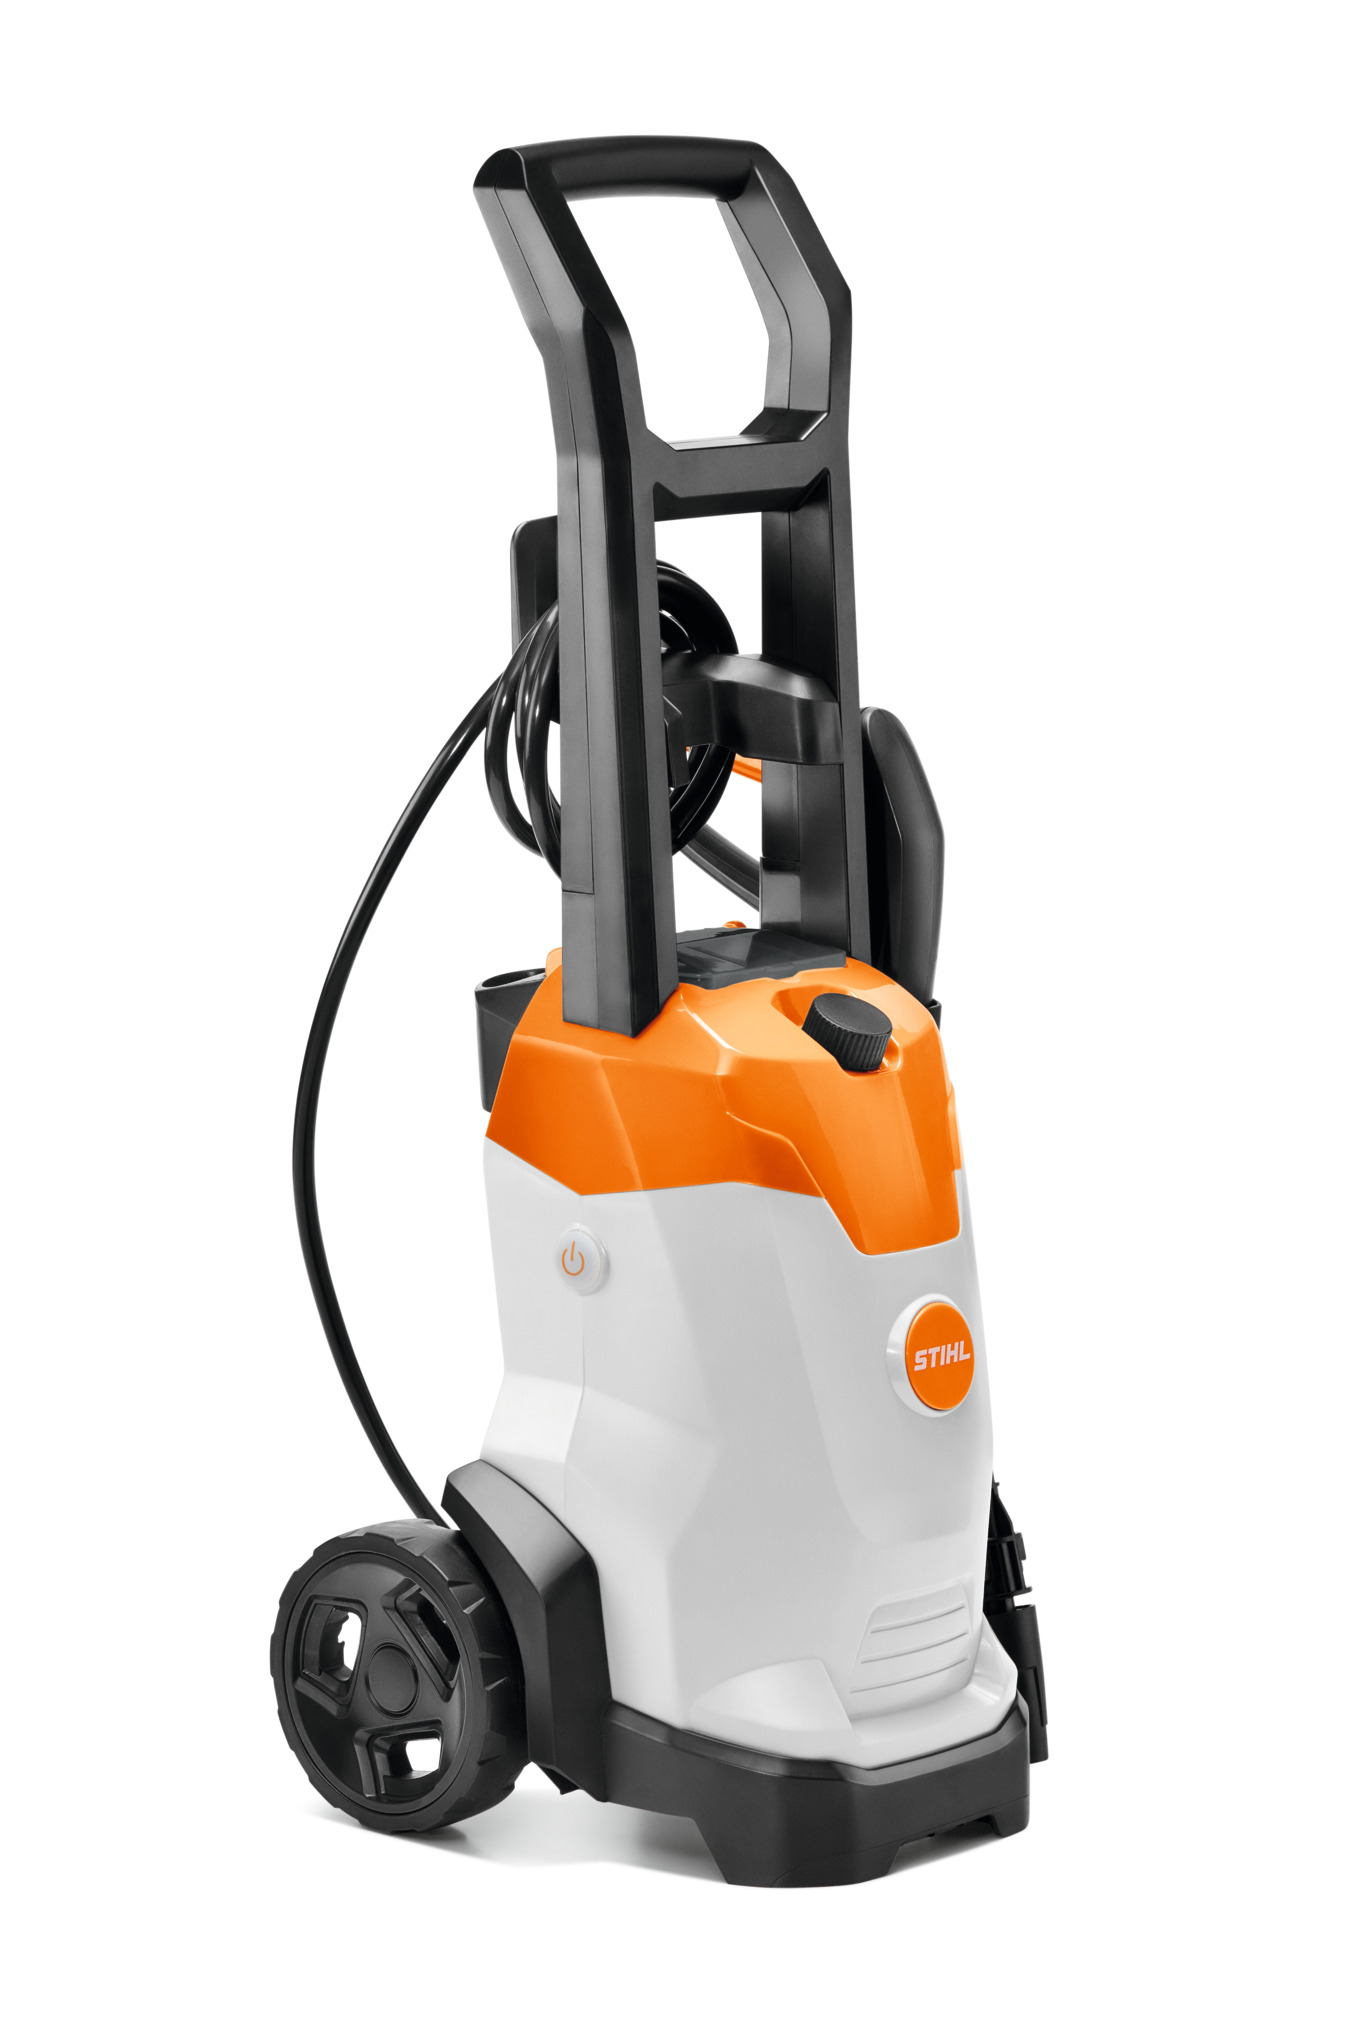 Children's battery-operated pressure washer